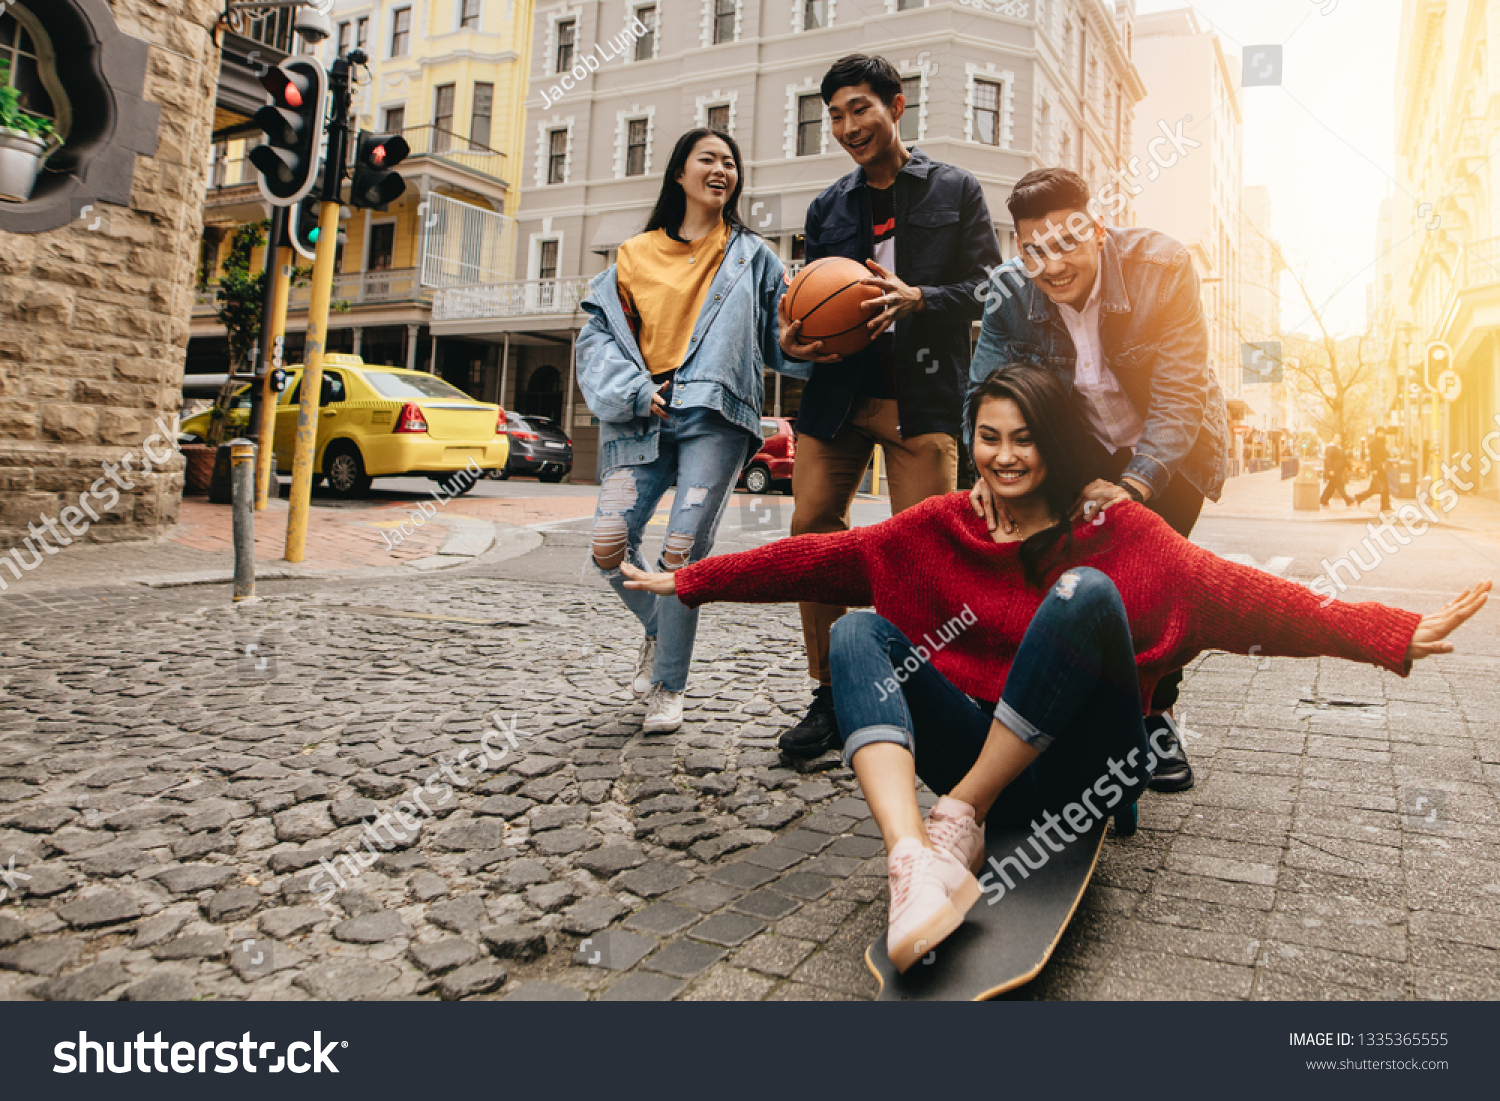 Asian young people in the city with skateboard and basketball. Woman being pushed by man  on skateboard outdoors on street, with their friends walking by in the city street. #1335365555